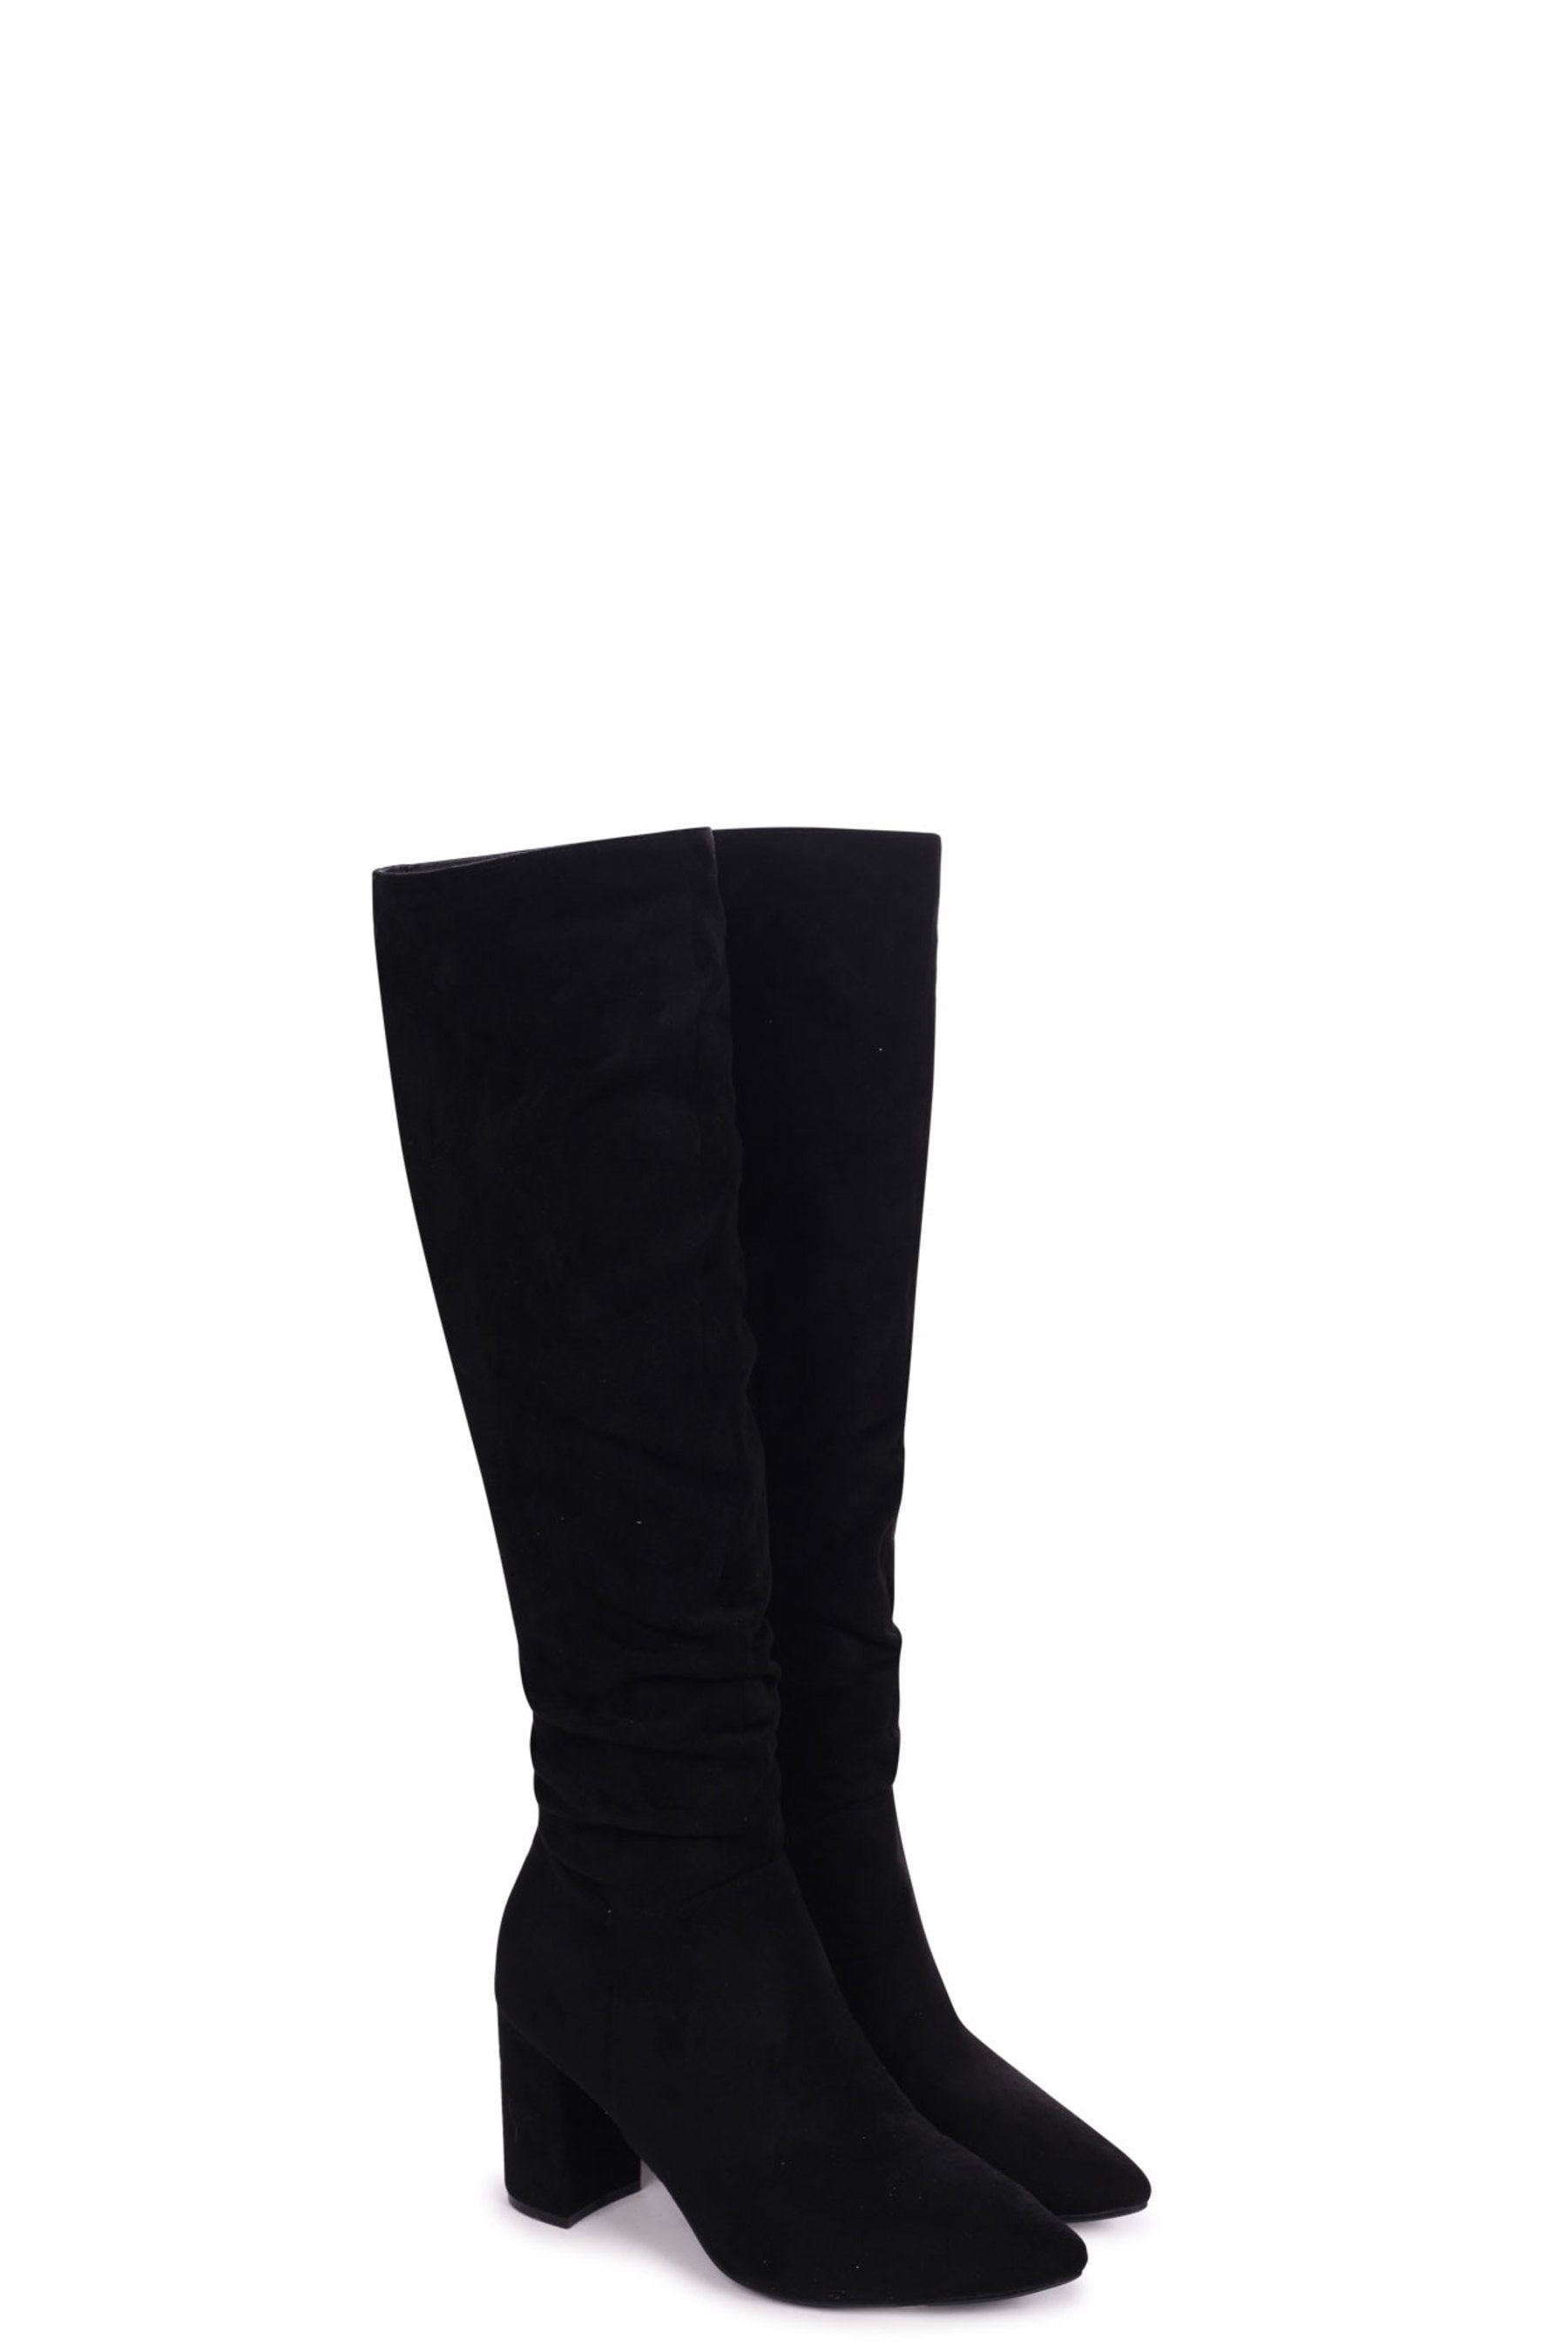 Buy Linzi Black Bonnie Faux Suede Block Heel Knee High Ruched Boot With ...